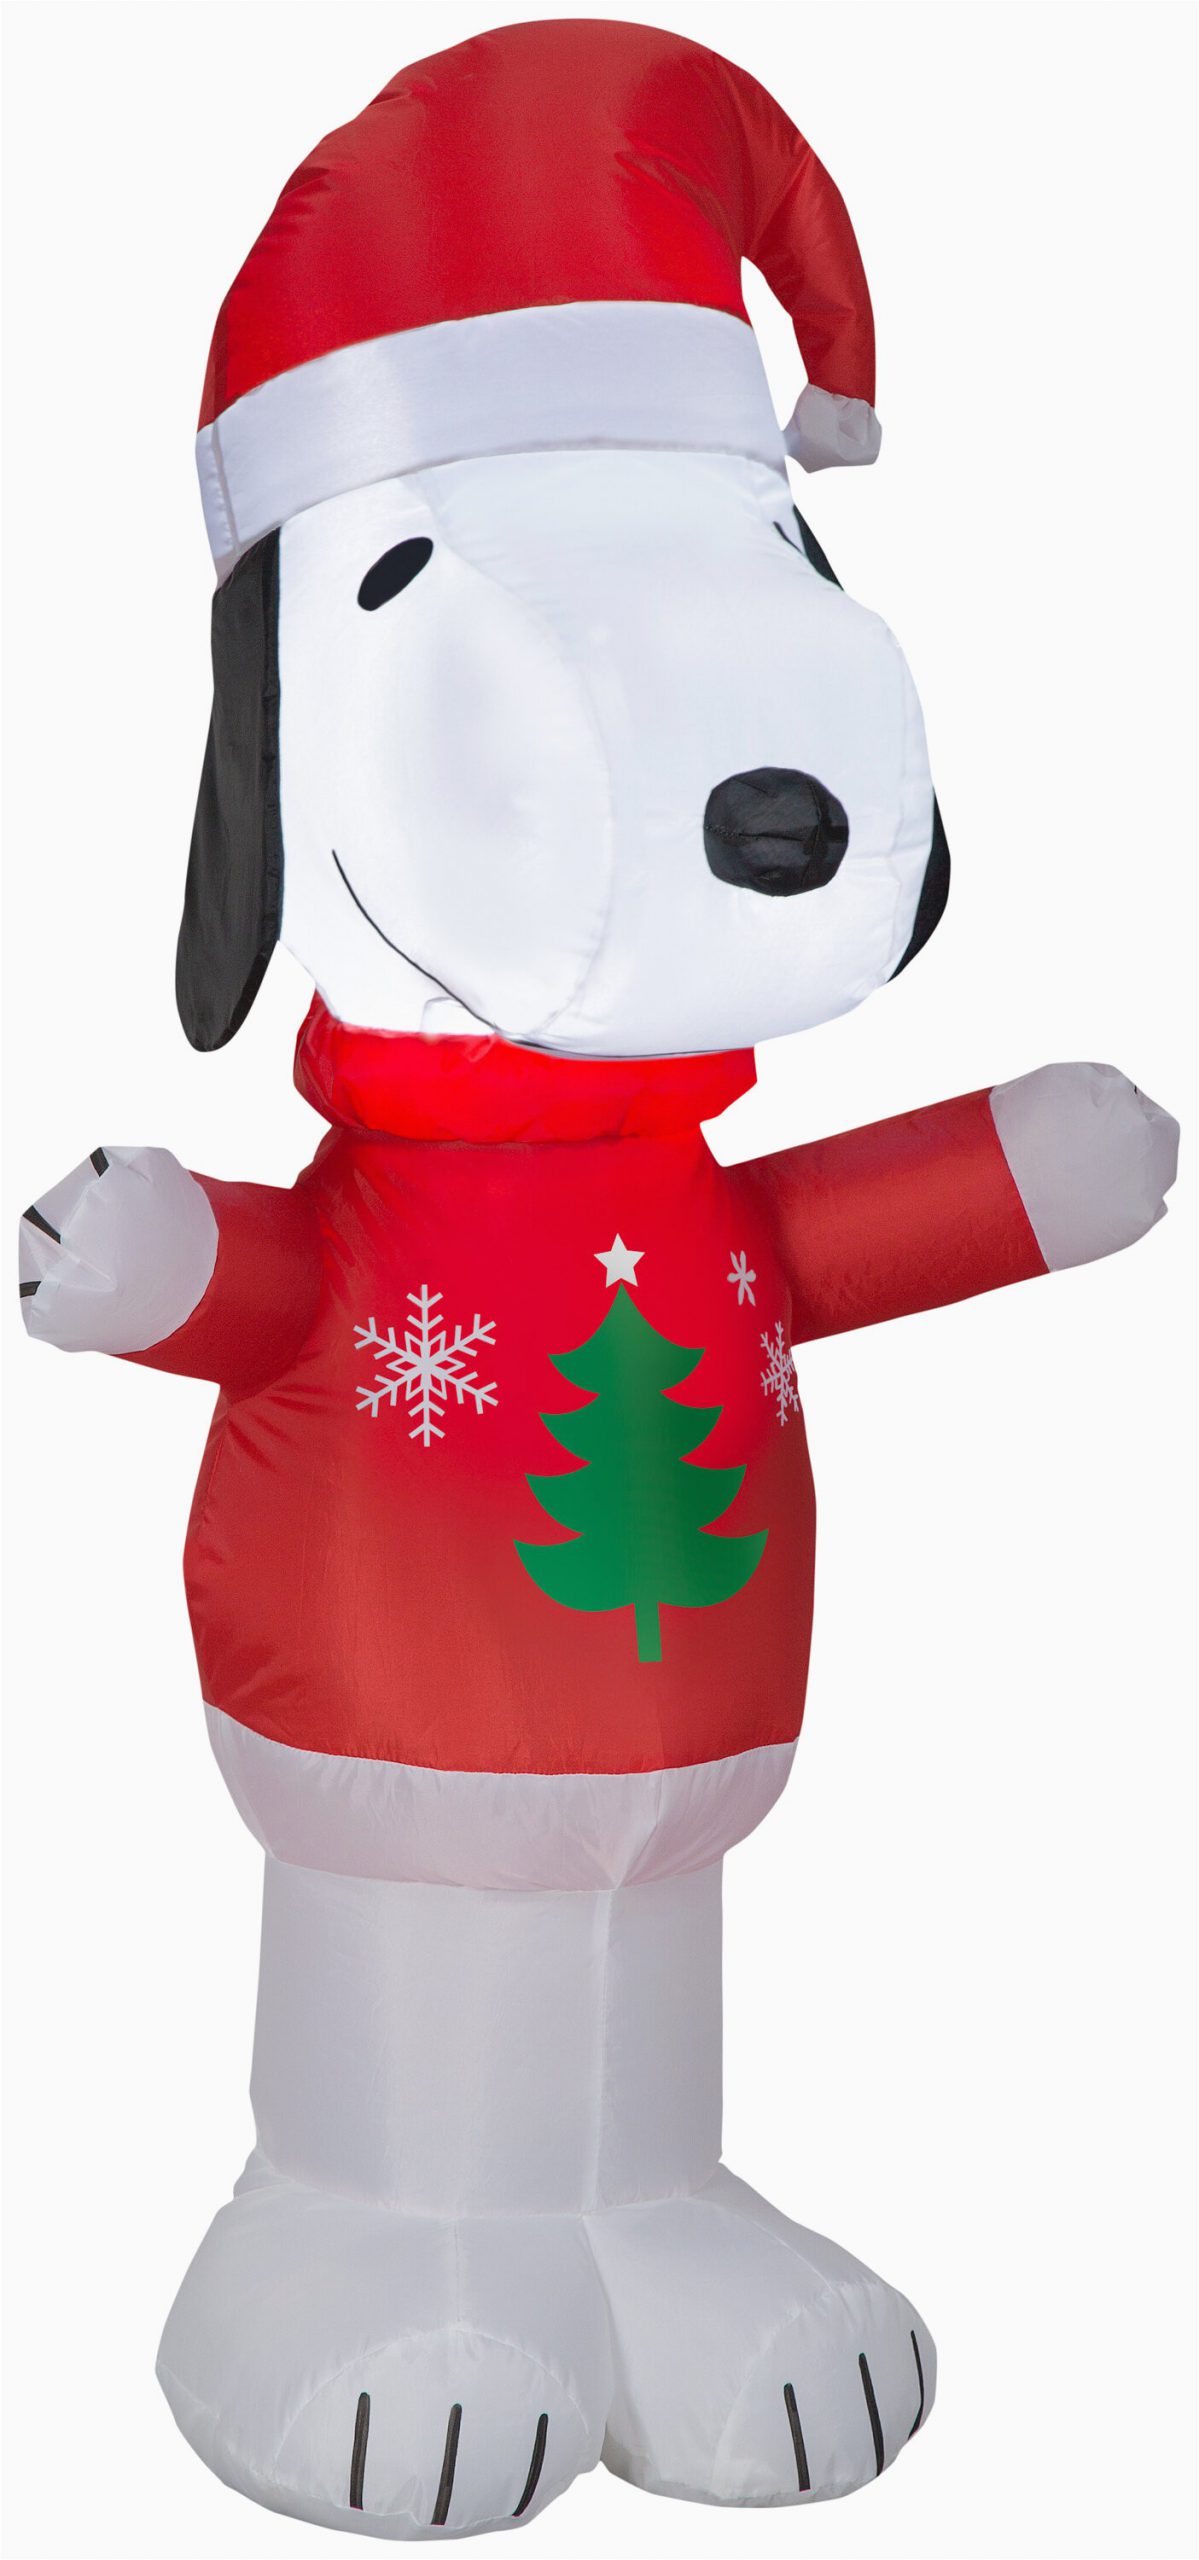 Snoopy Christmas Bathroom Rug Airblown Snoopy In Christmas Tree Sweater Peanuts Christmas Inflatable